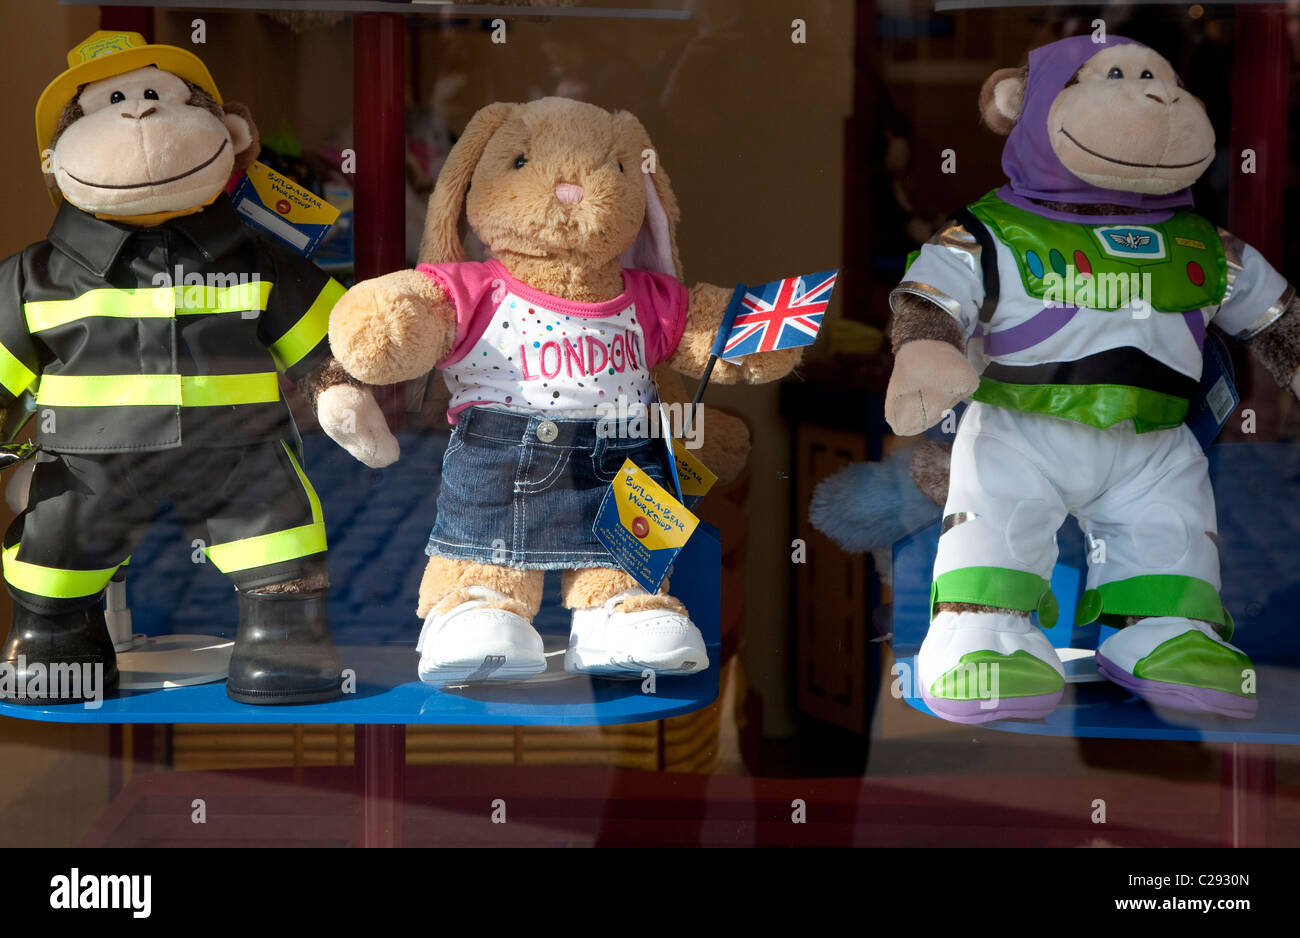 Build-A-Bear soft toys in London shop window Stock Photo